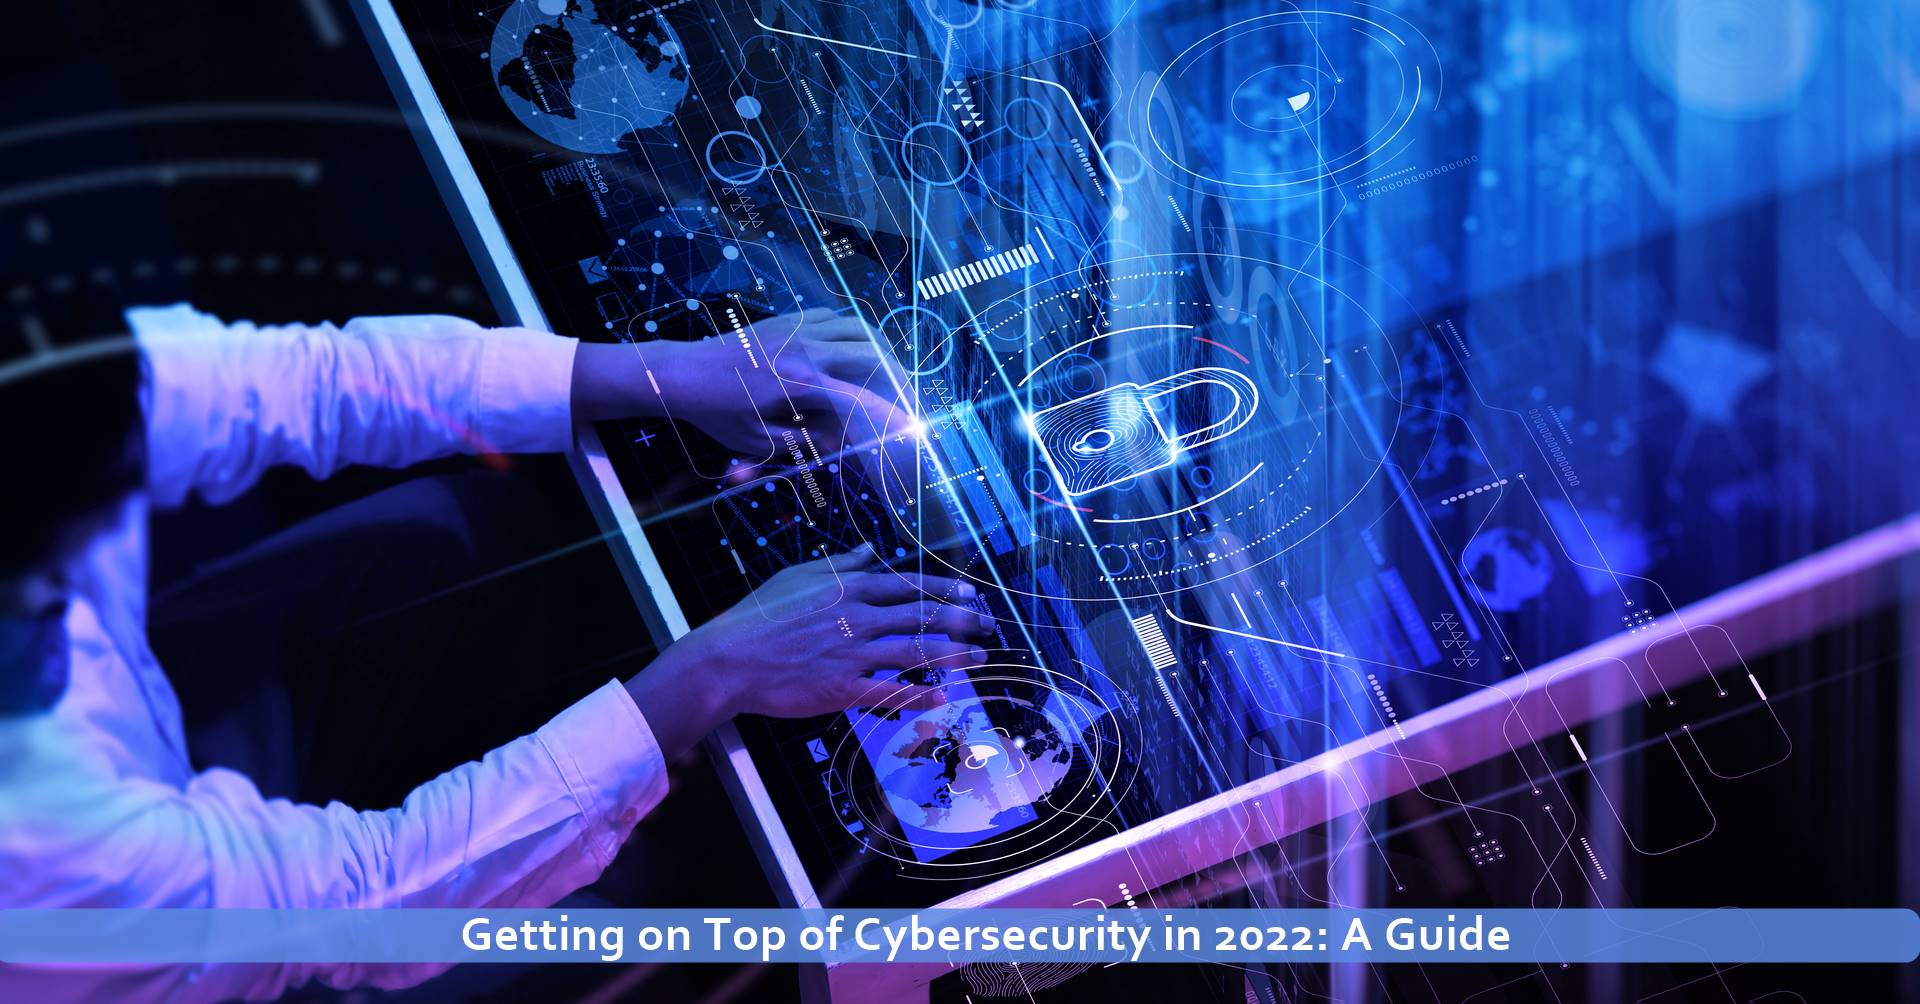 Getting on Top of Cybersecurity in 2022: A Guide